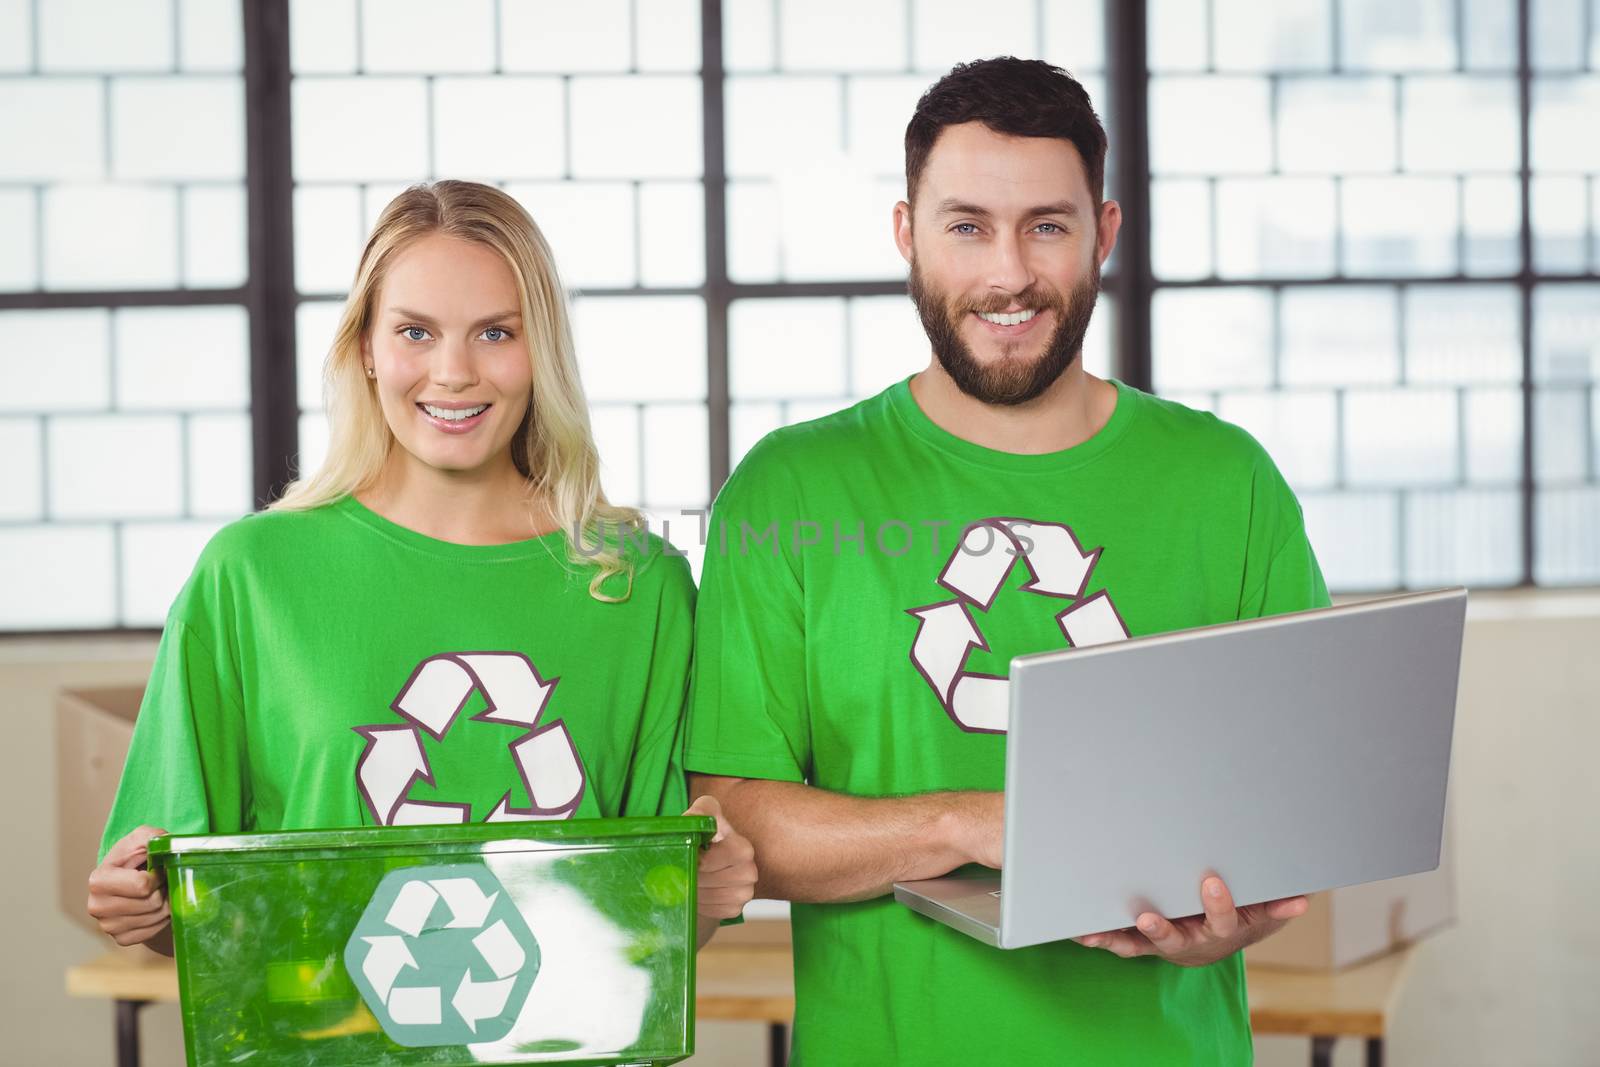 Portrait of smiling volunteers in recycling symbol tshirts in creative office